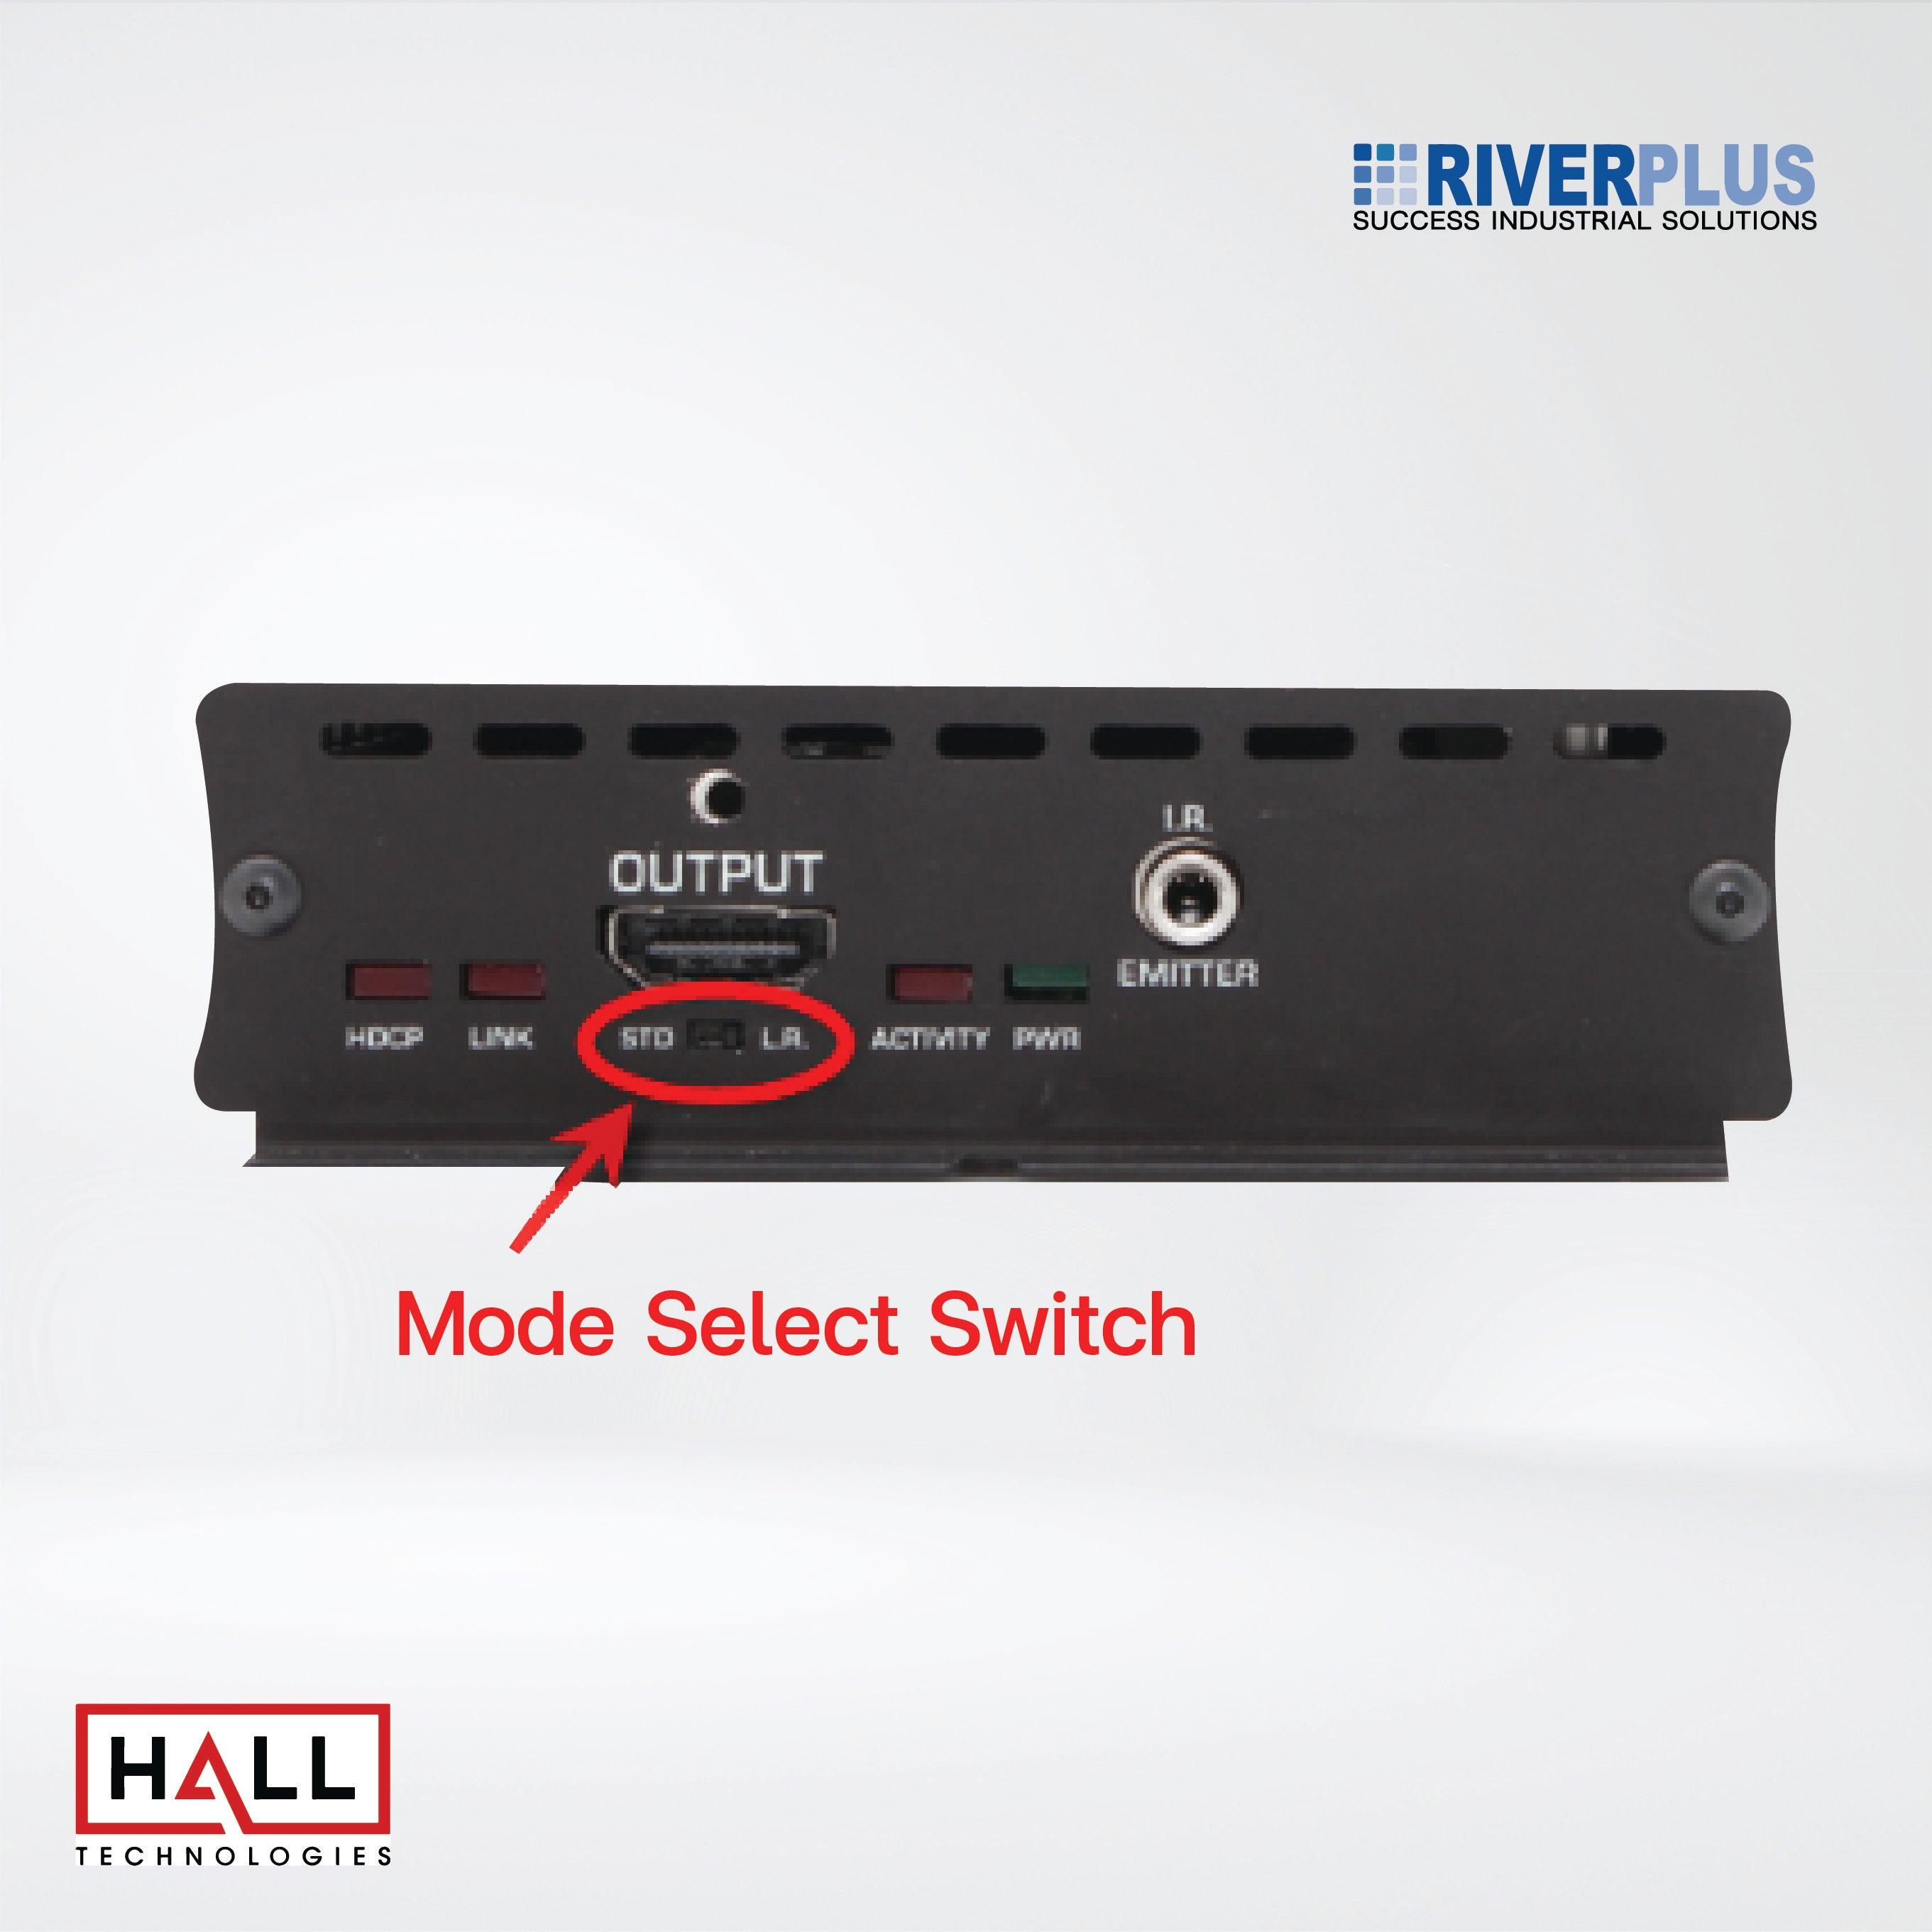 UHBX-P1 HDMI over UTP Extender with HDBaseT™ and PoH (Sender + Receiver ) - Riverplus